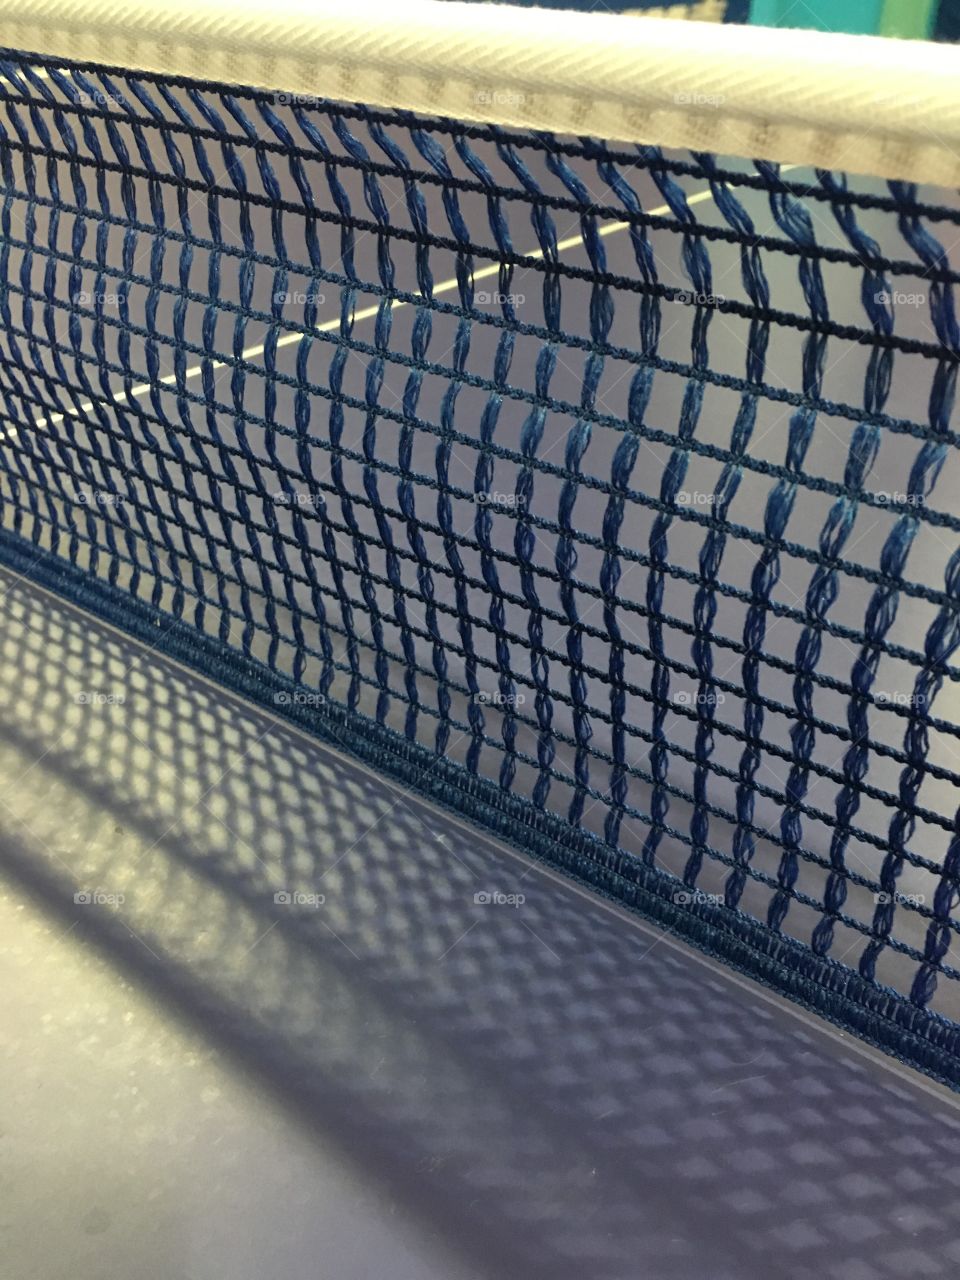 Table Tennis - Ping Pong Table and Net Close Up